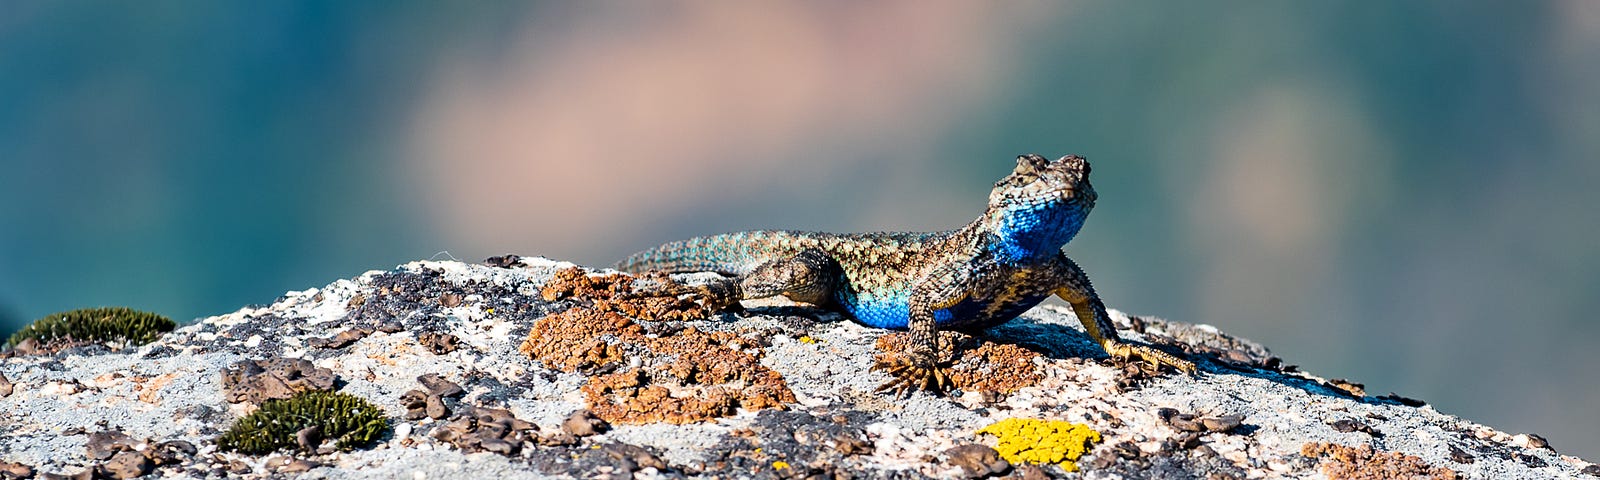 Western fence lizard in Sequoia National Park in California.